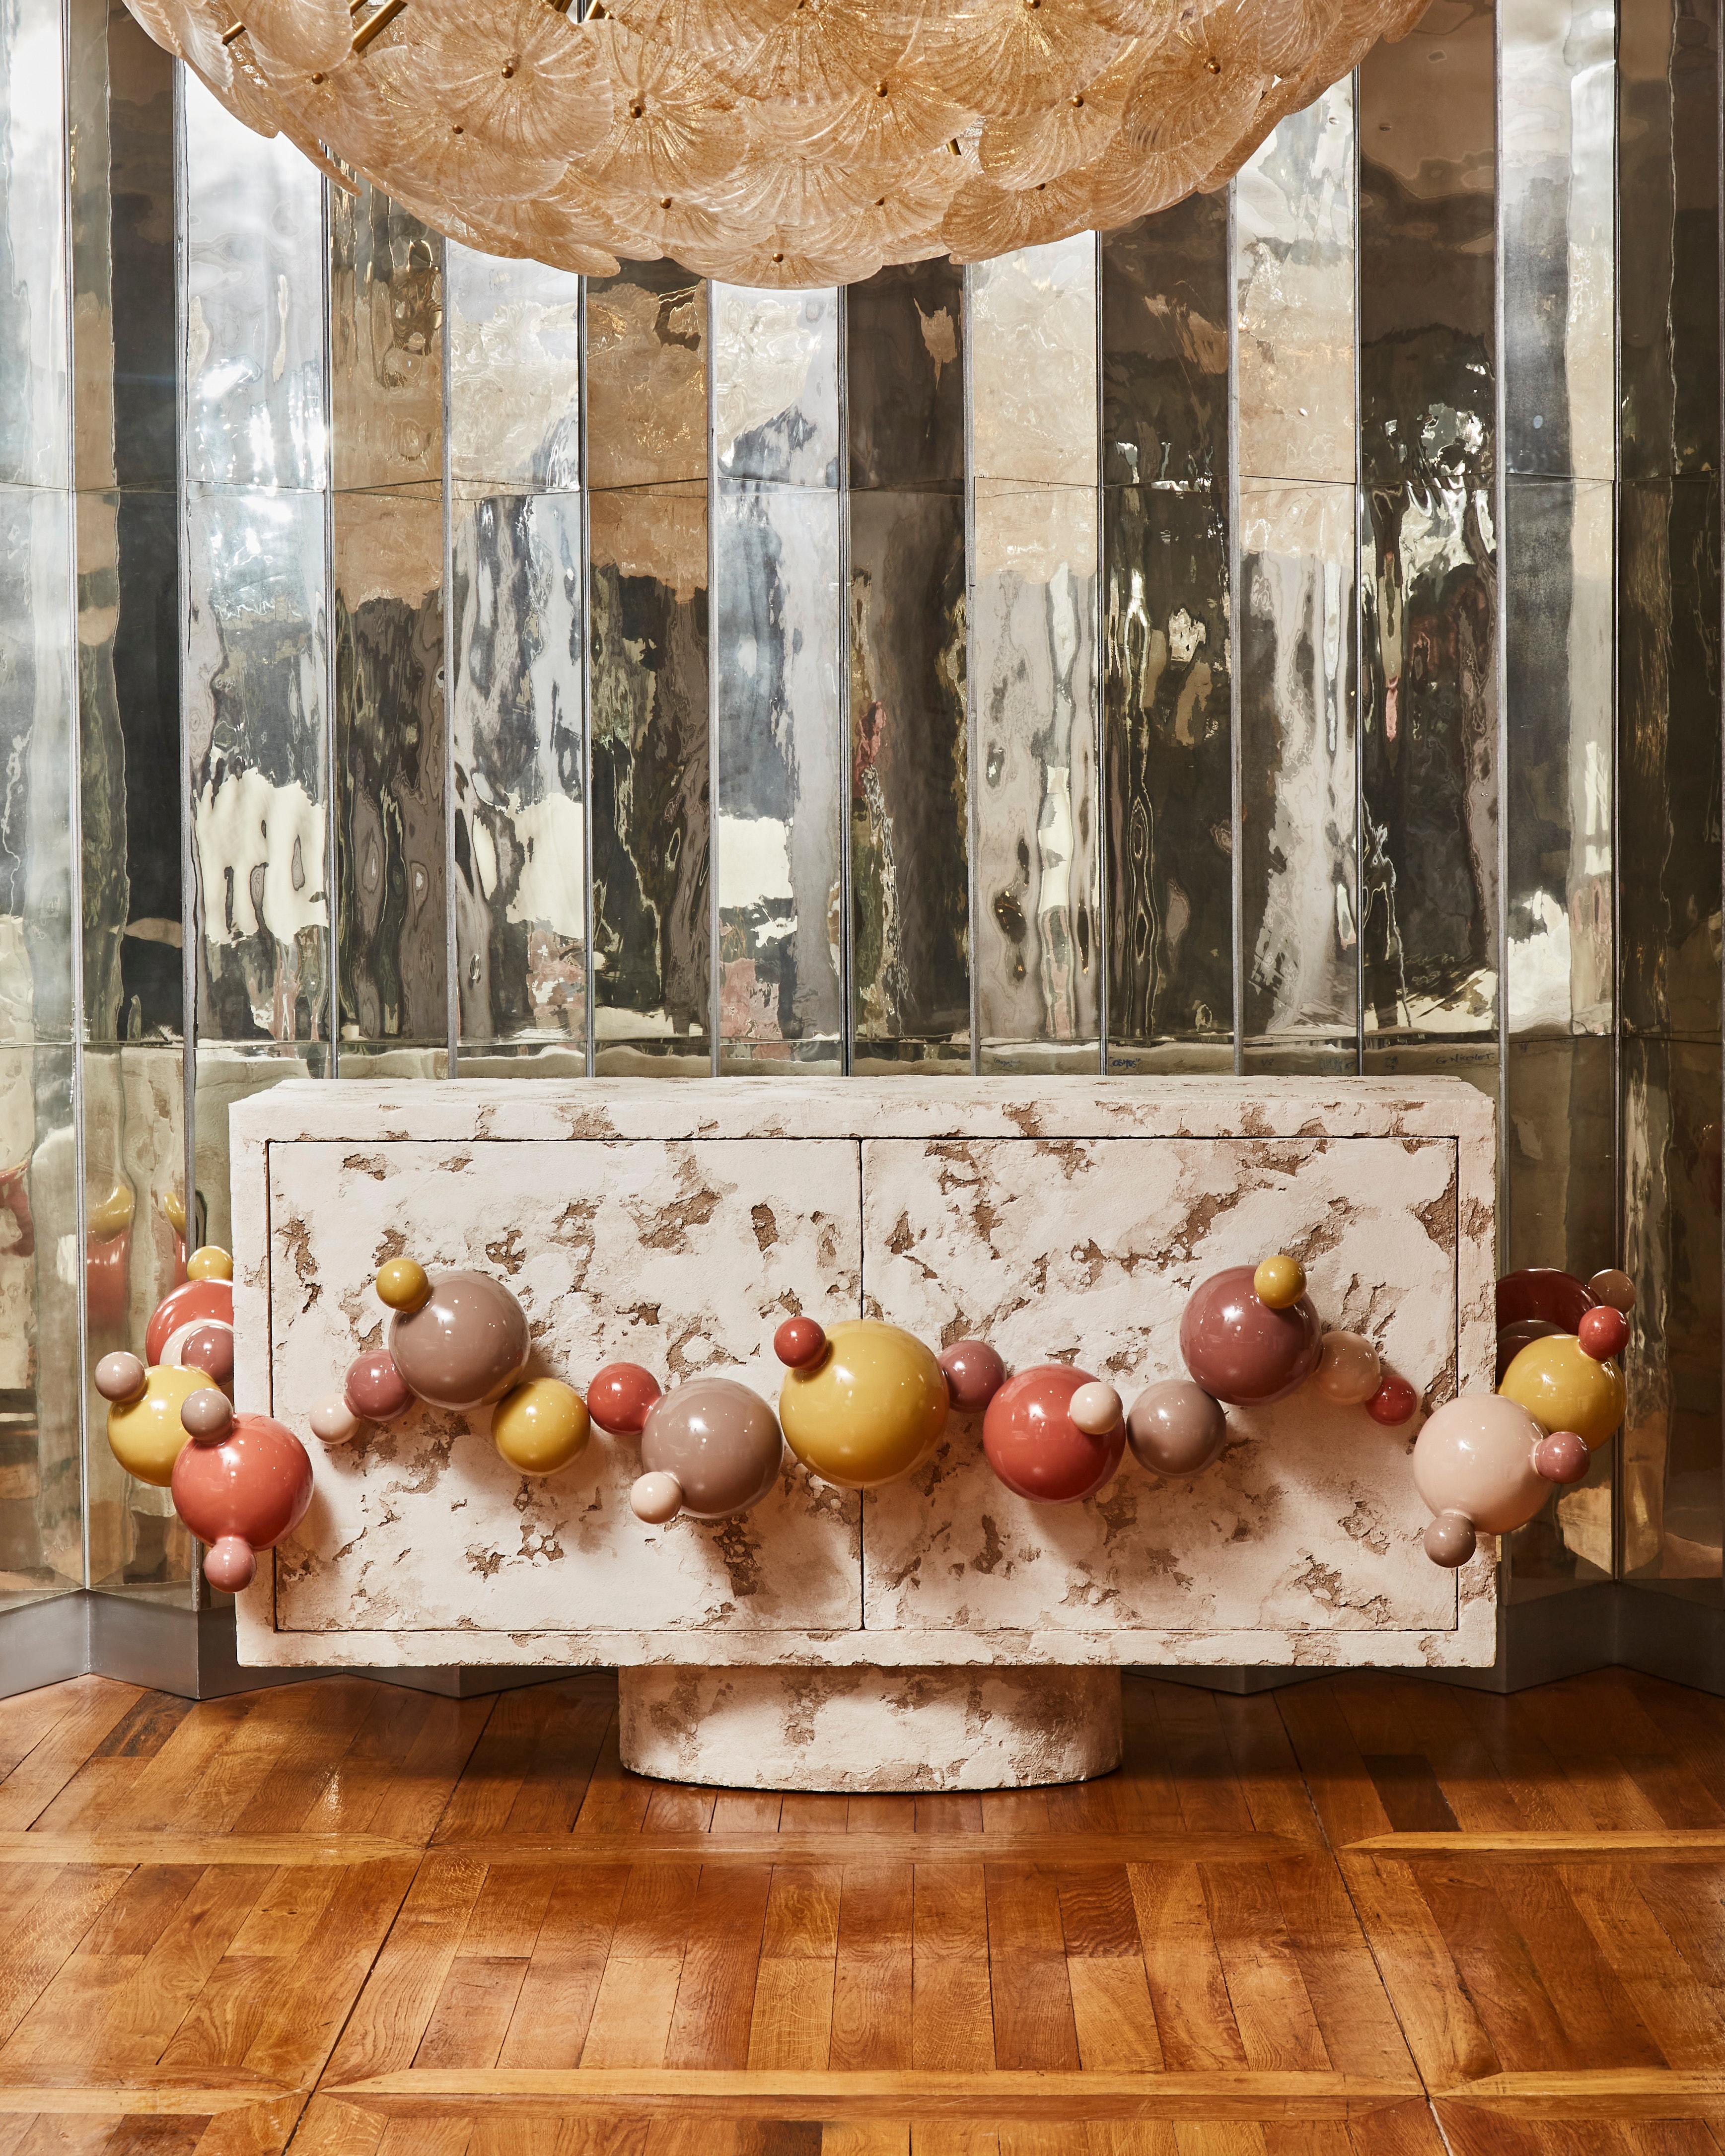 Exceptional sideboard in wood, plaster and fiberglass, adorned with lacquered metal balls. 2 doors.
Unique and signed piece by the artist Geoffroy Nicolet for Galerie Glustin.
France, 2022.